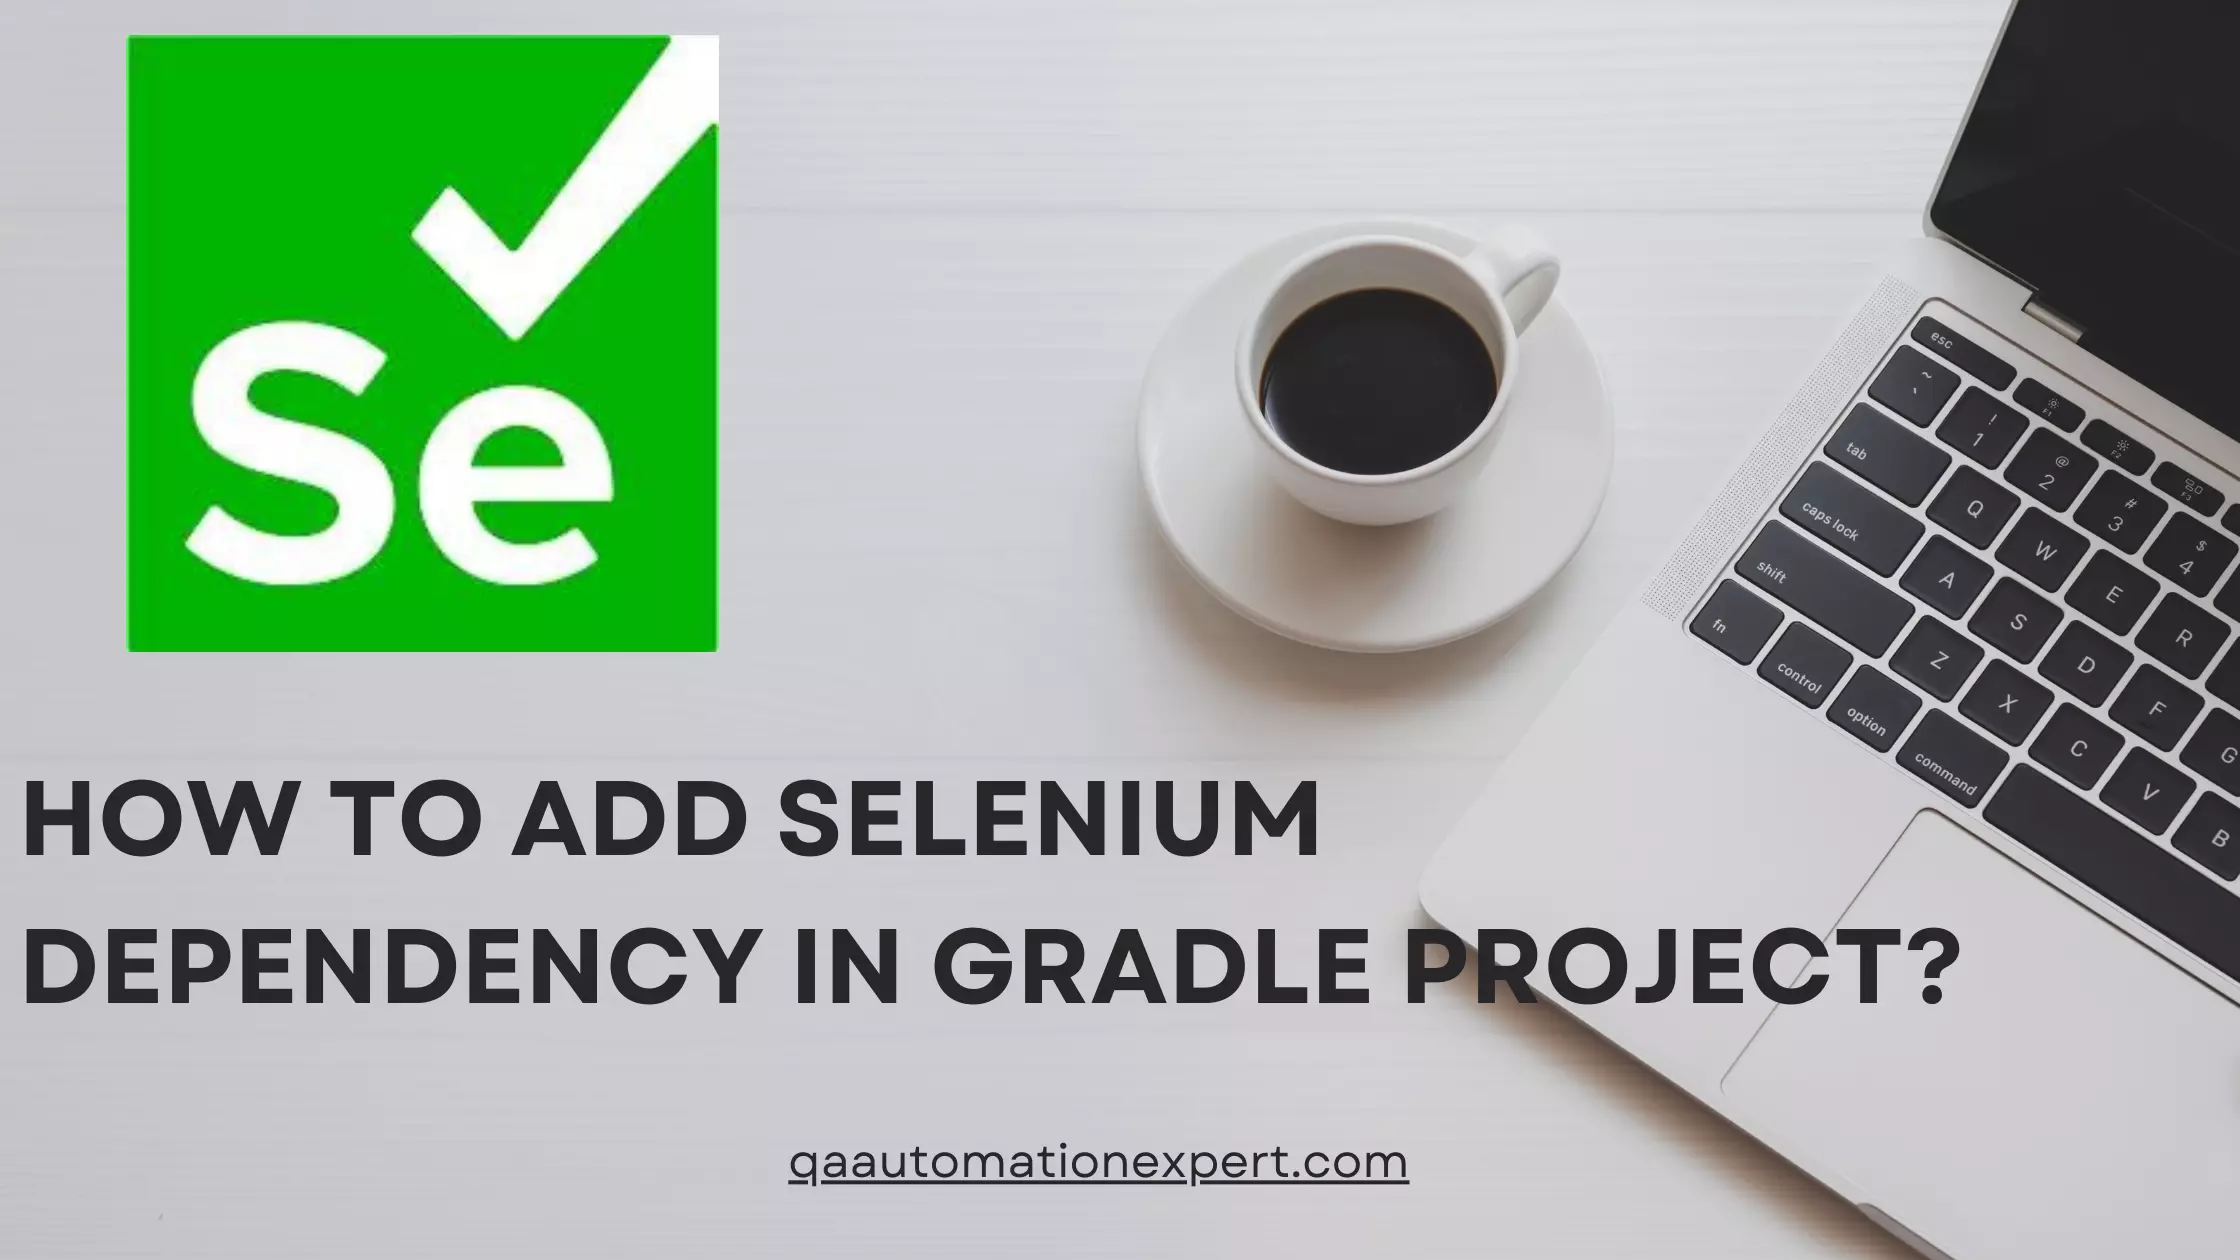 How to add selenium dependency in gradle project?